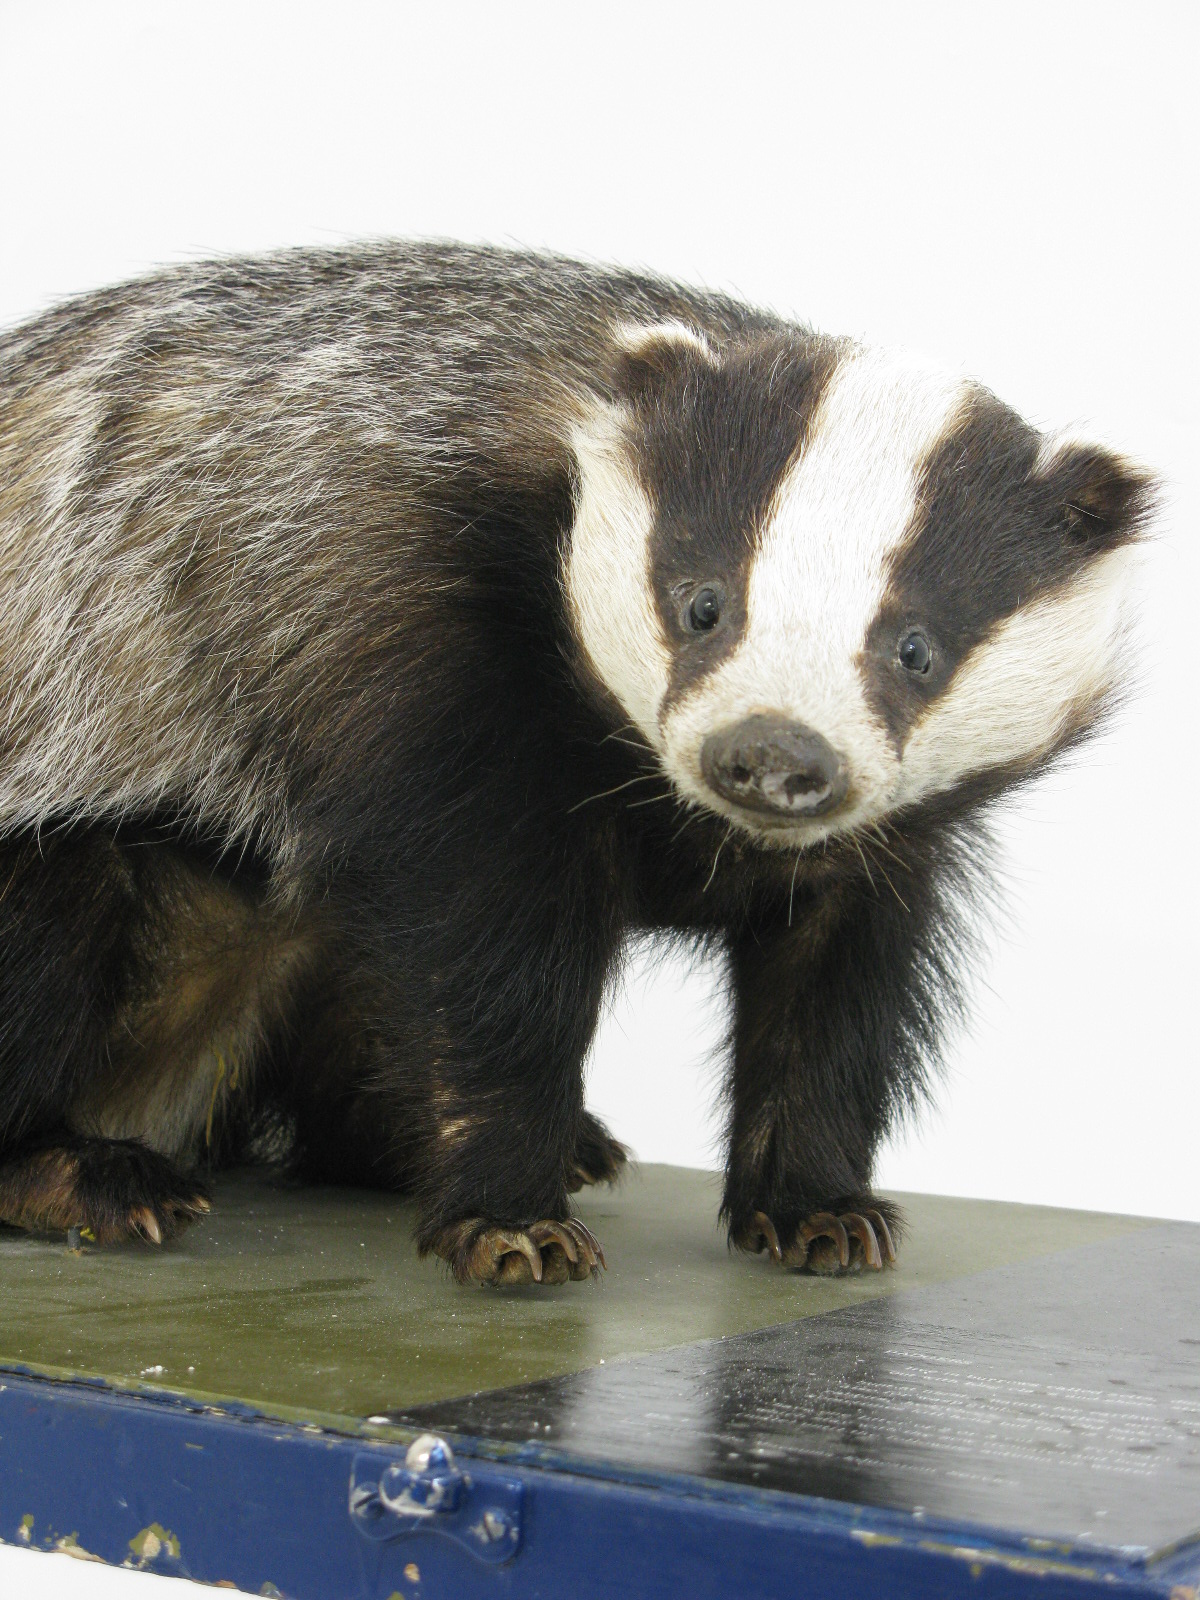 Photo of a Badger